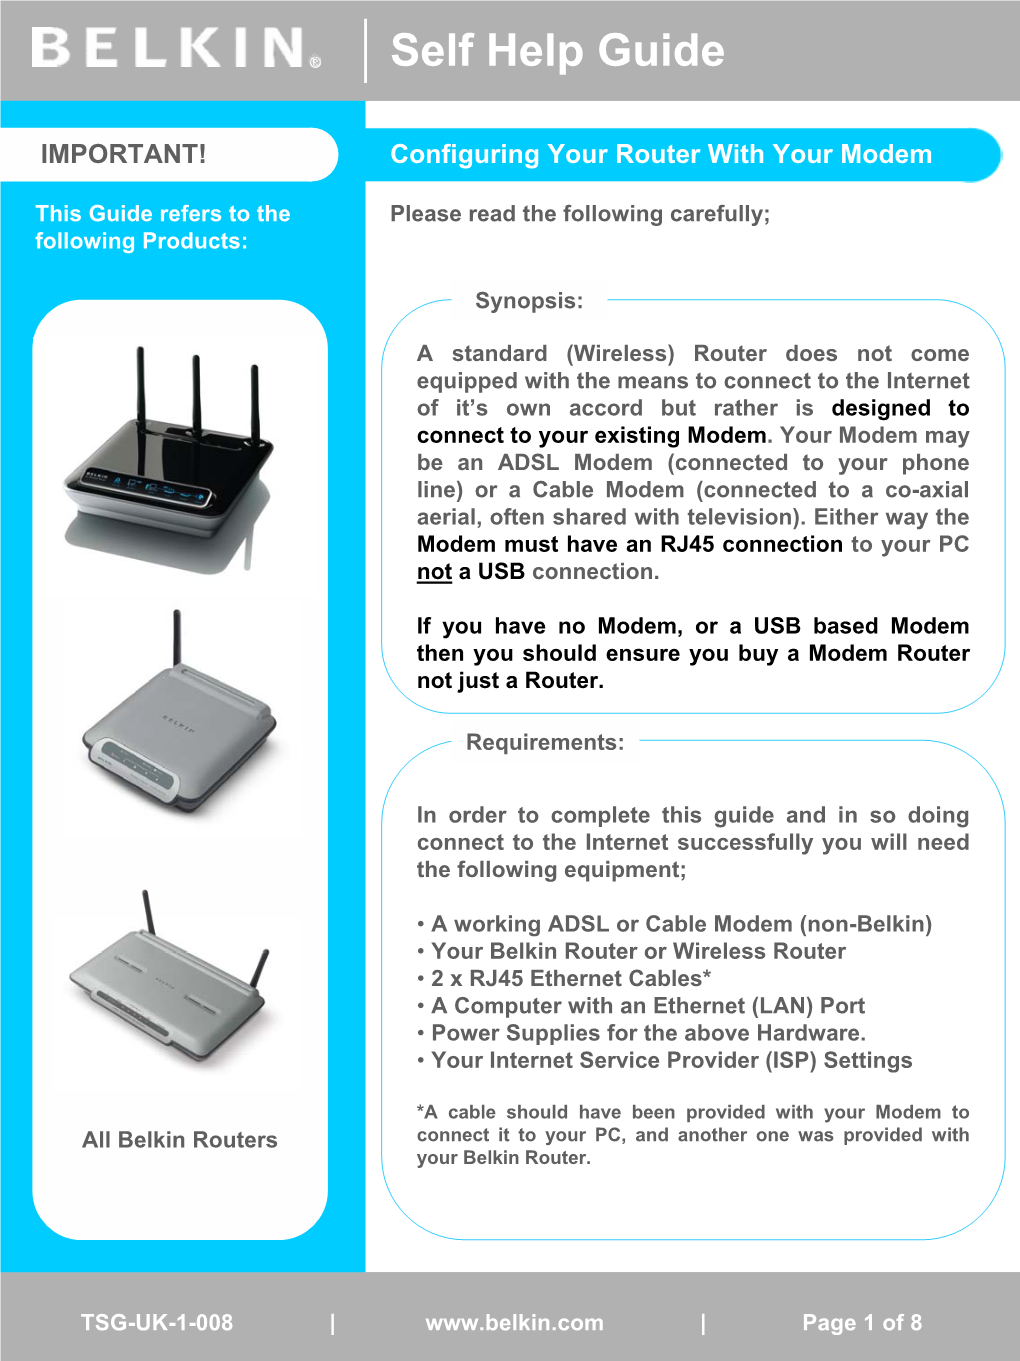 Configuring Your Router with Your ADSL Or Cable Modem